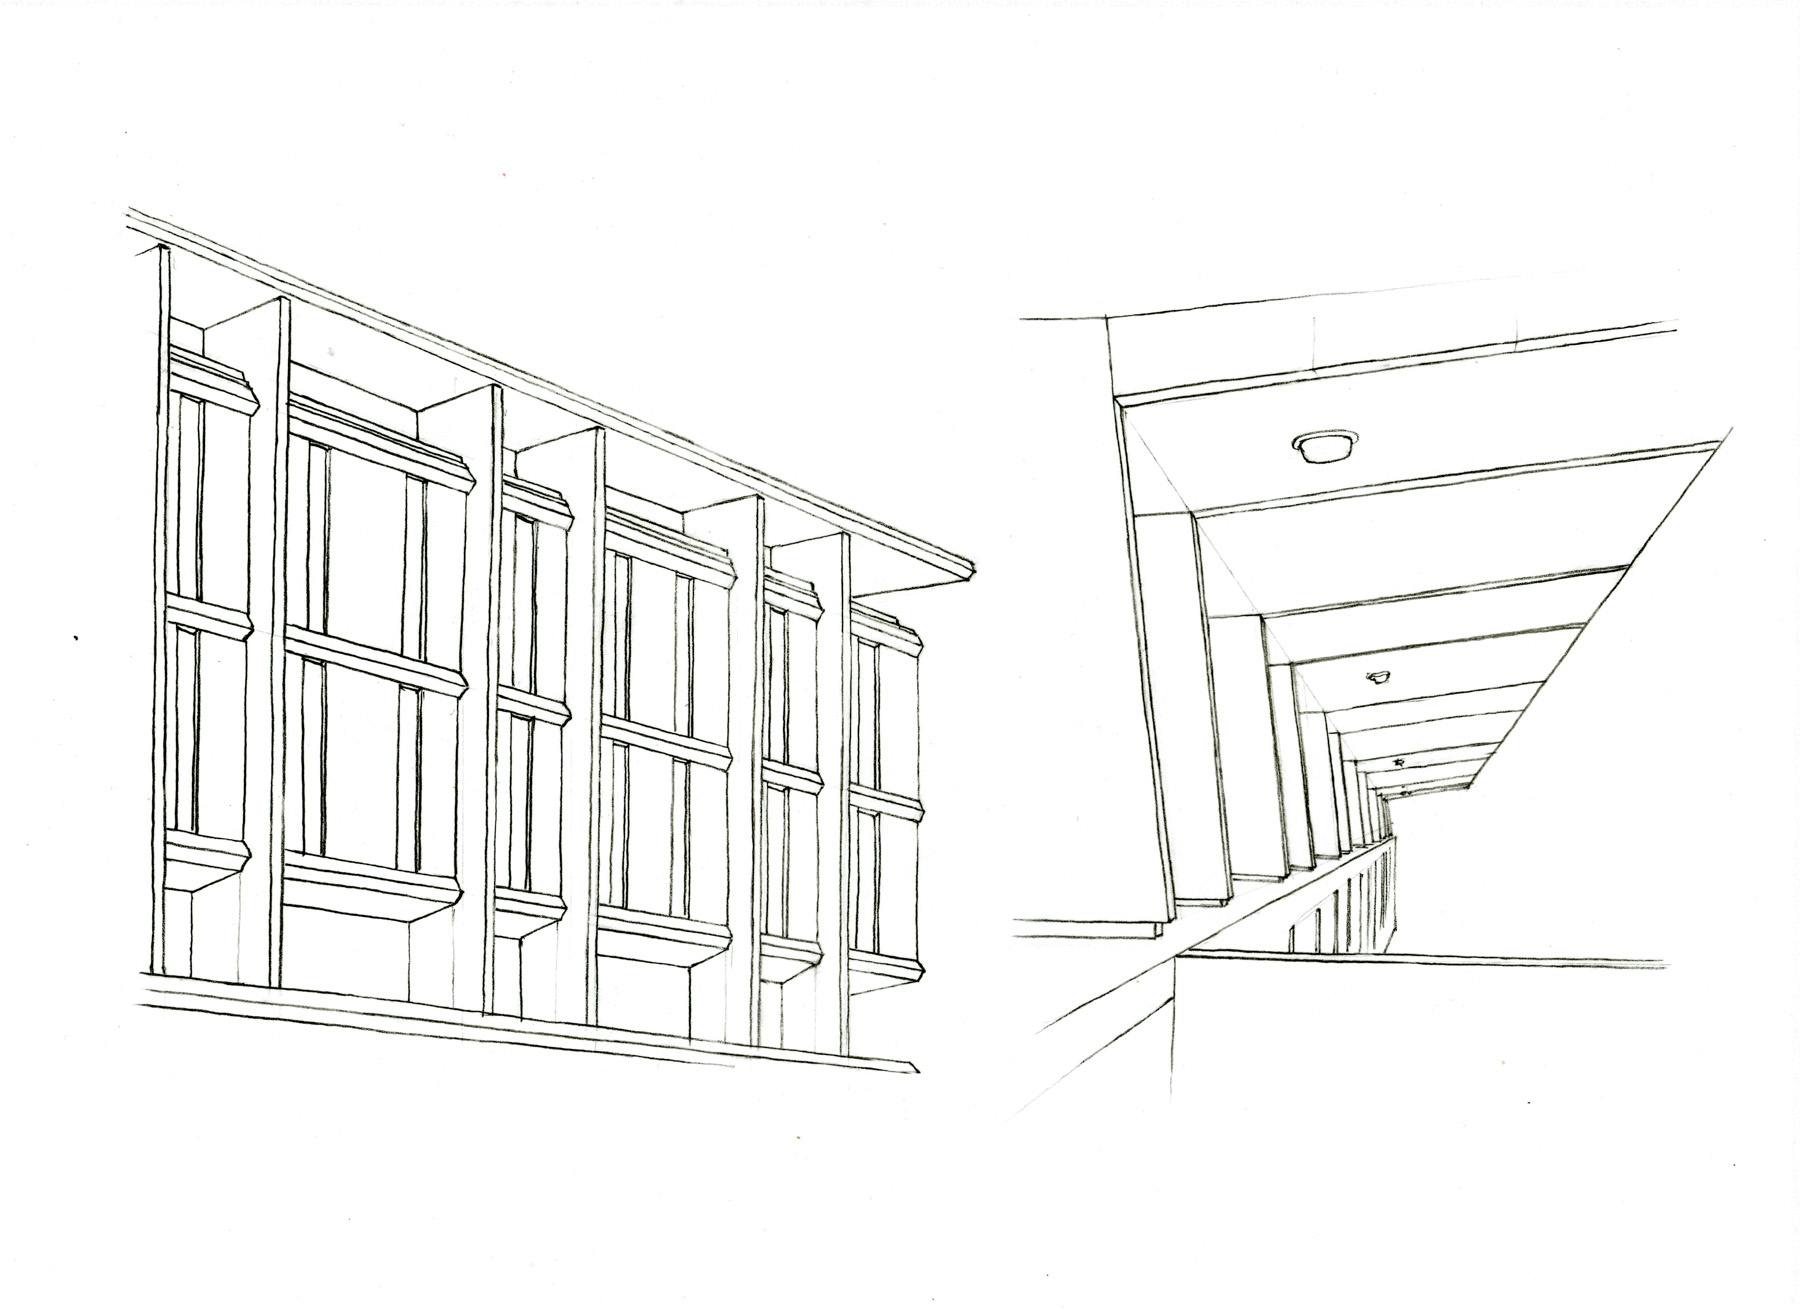 Line drawings of a corner of the John D. Rockefeller Jr. Library and its cantilevered second floor.